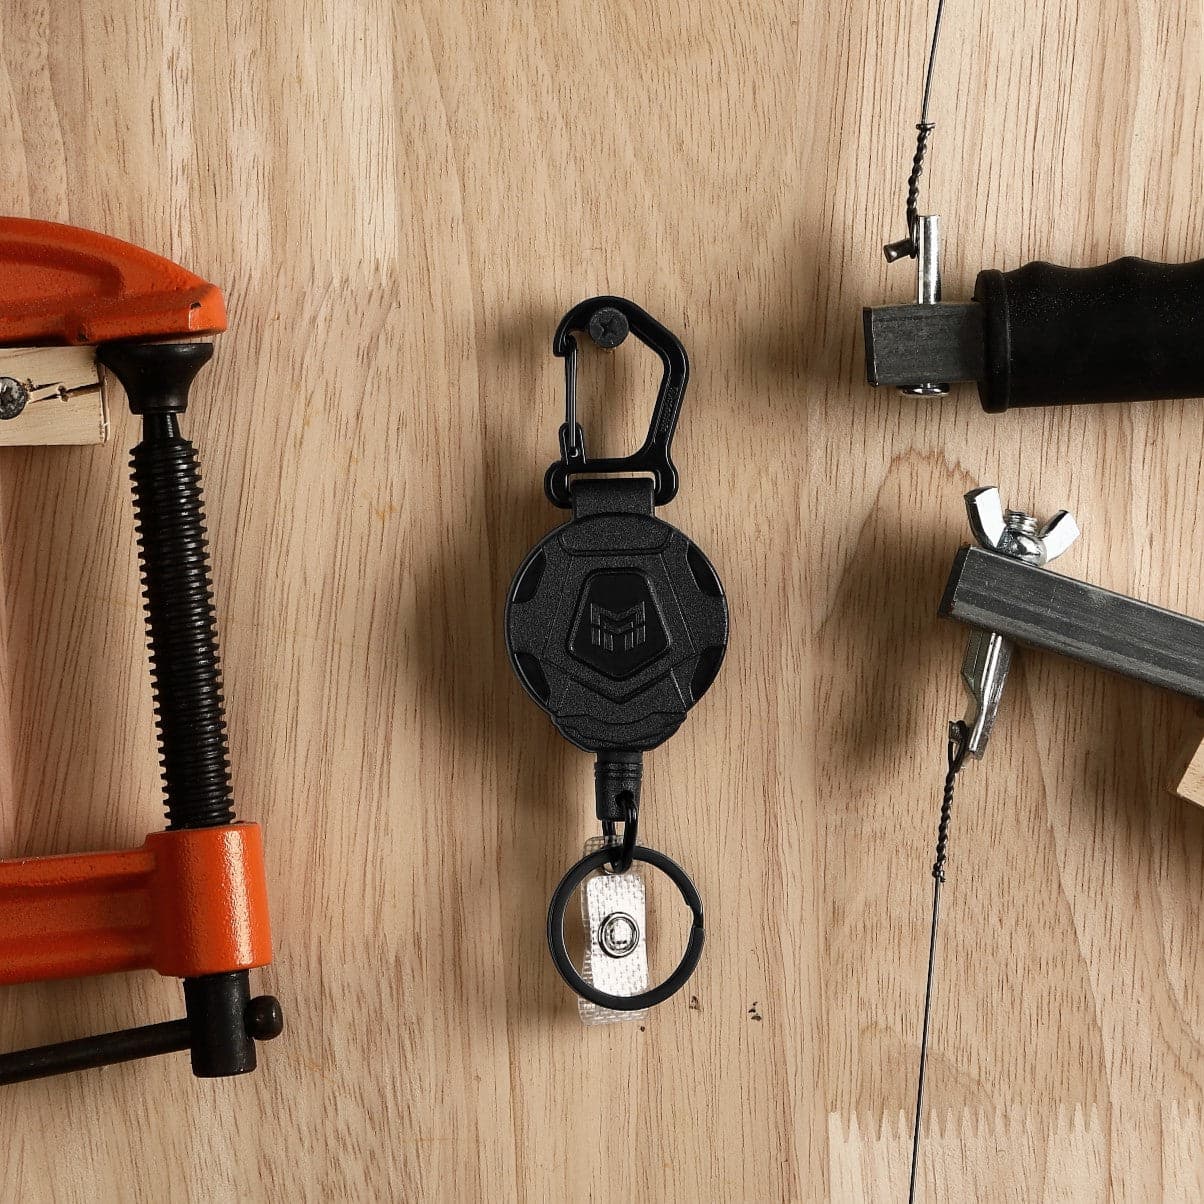 Retractable-Keychain-Carabiner-Holder-Tactical hanging on the tool wall, with saws, hammers etc. usage scenario